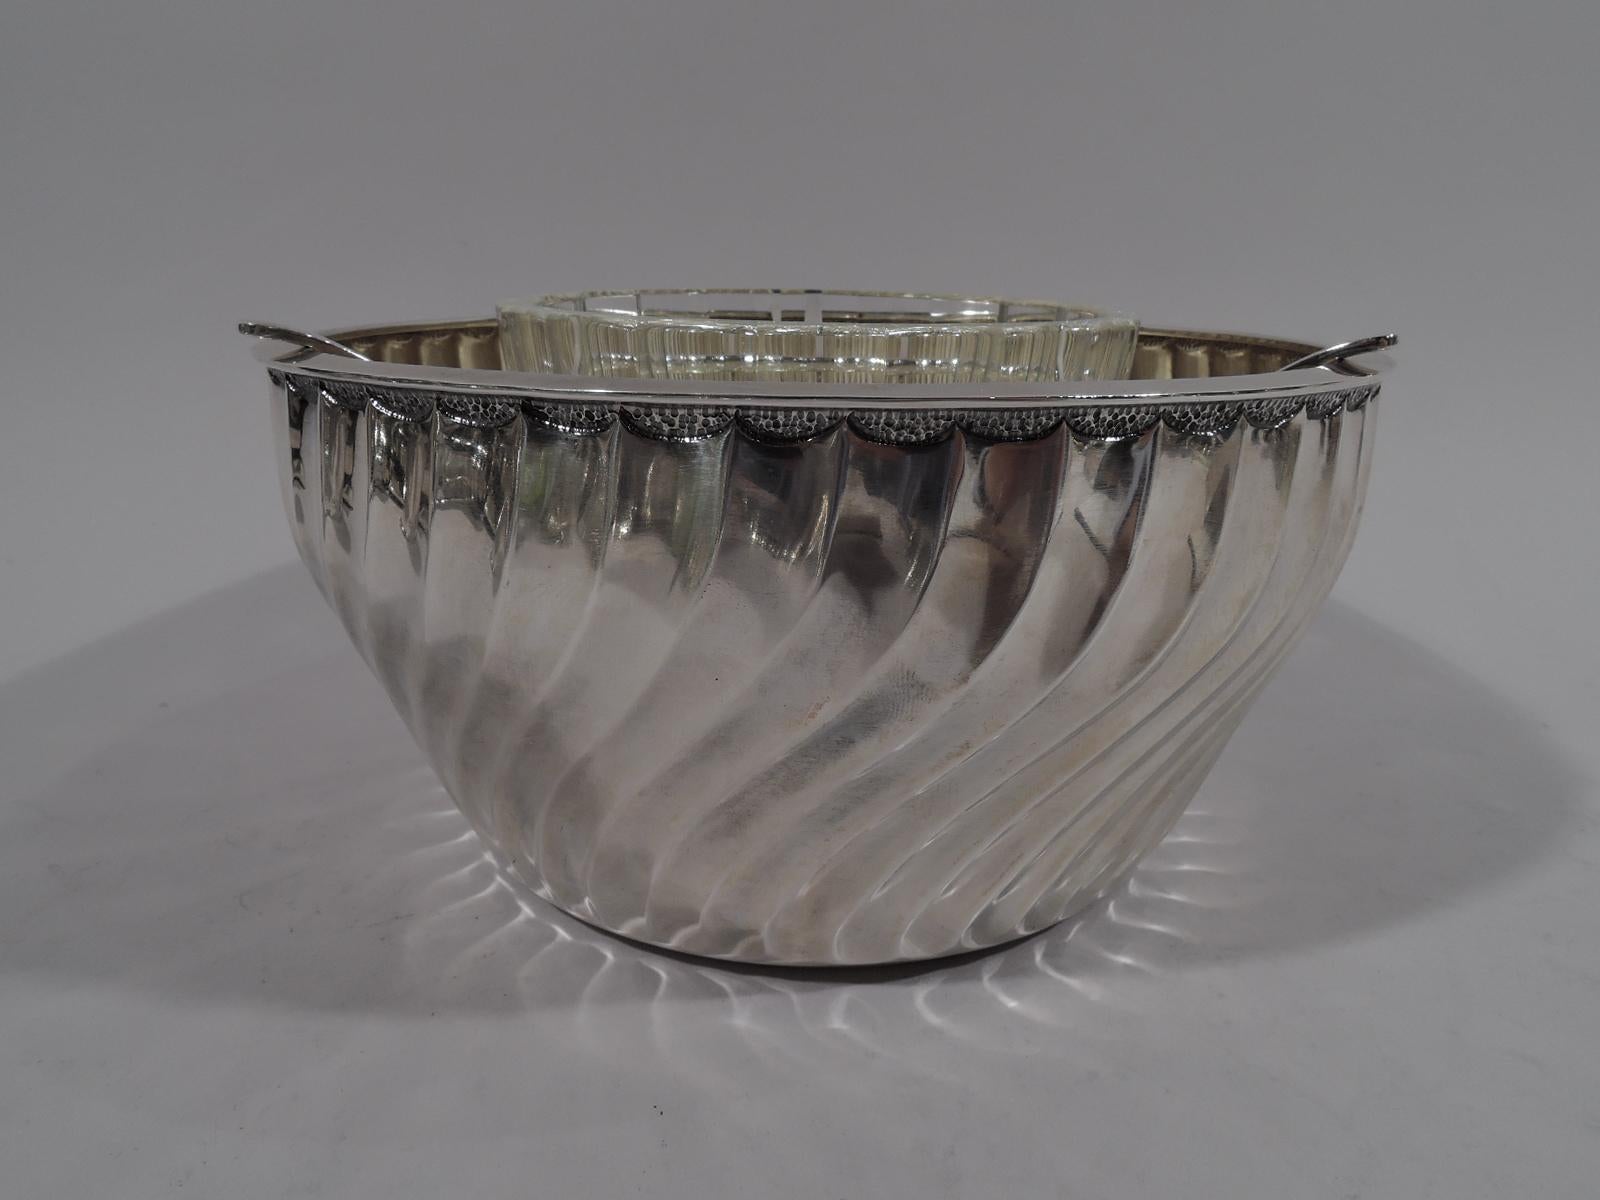 Italian Classical sterling caviar bowl. Curved and tapering sides with swishing, twisting flutes and discreet stippled lunettes near flat rim. Detachable tripod open frame with fluted clear glass bowl. A beautiful addition to the buffet. Fully